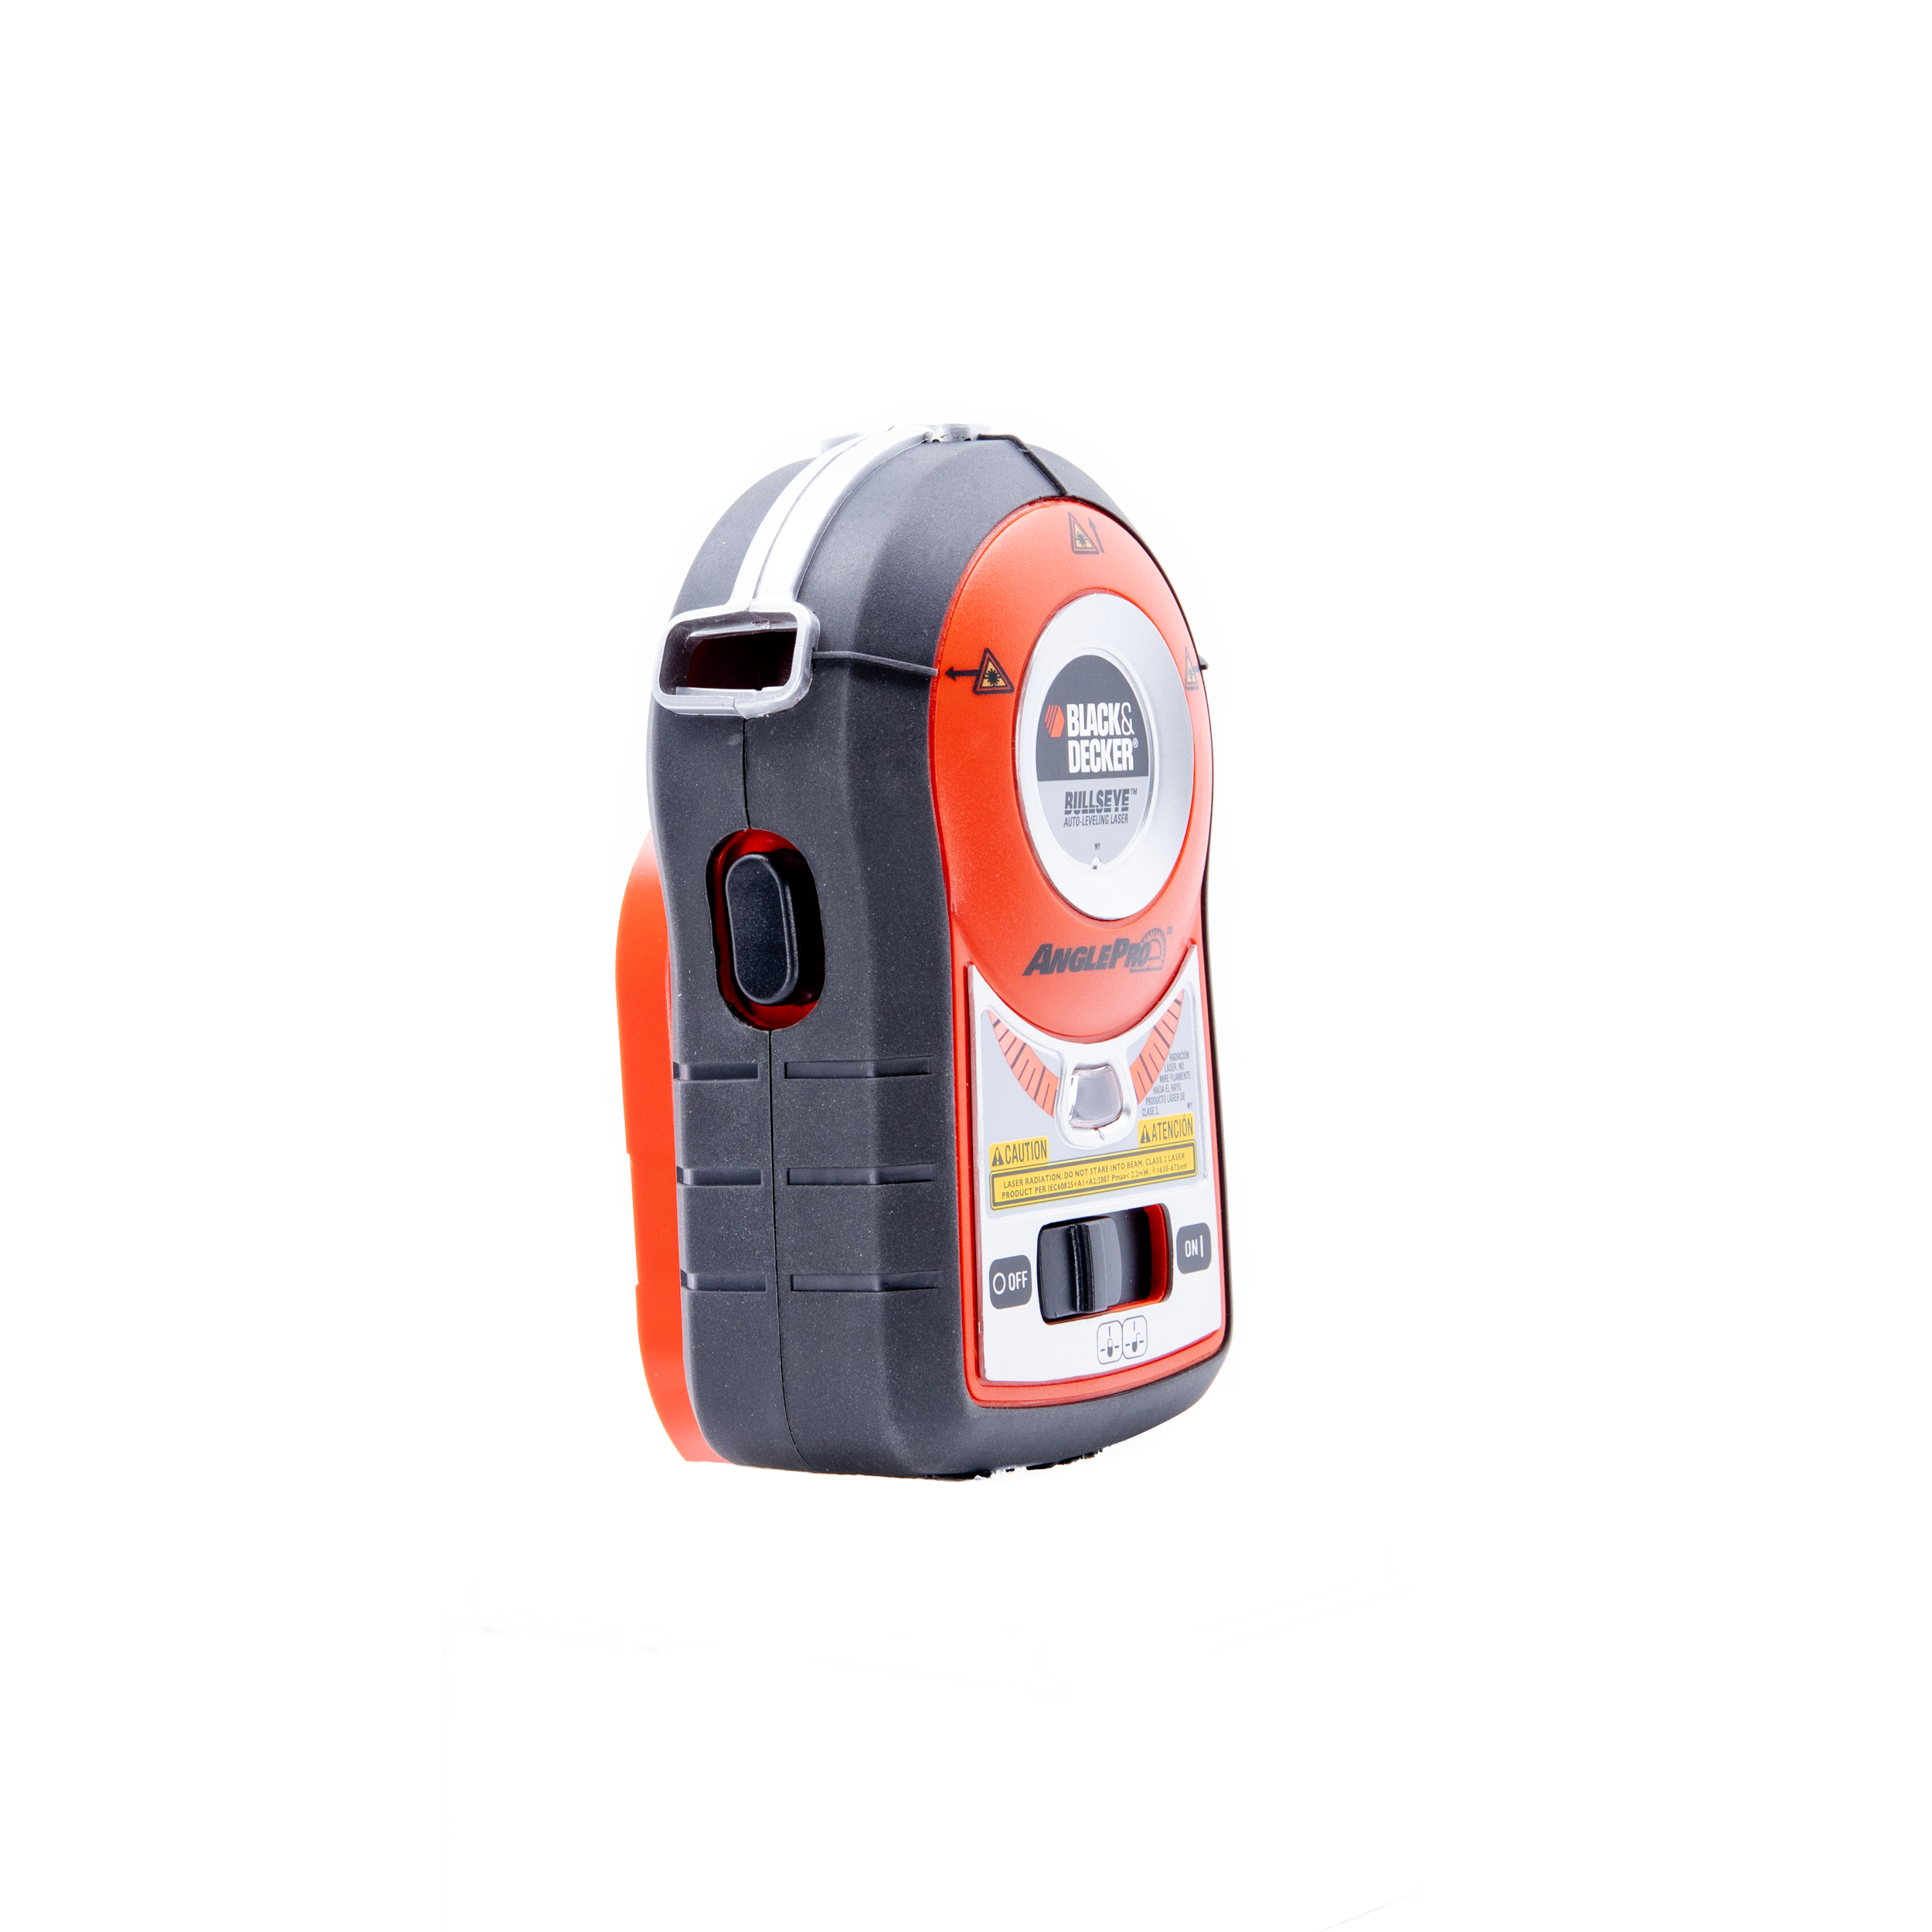 black & decker bdl170 bullseye auto-leveling laser with anglepro 